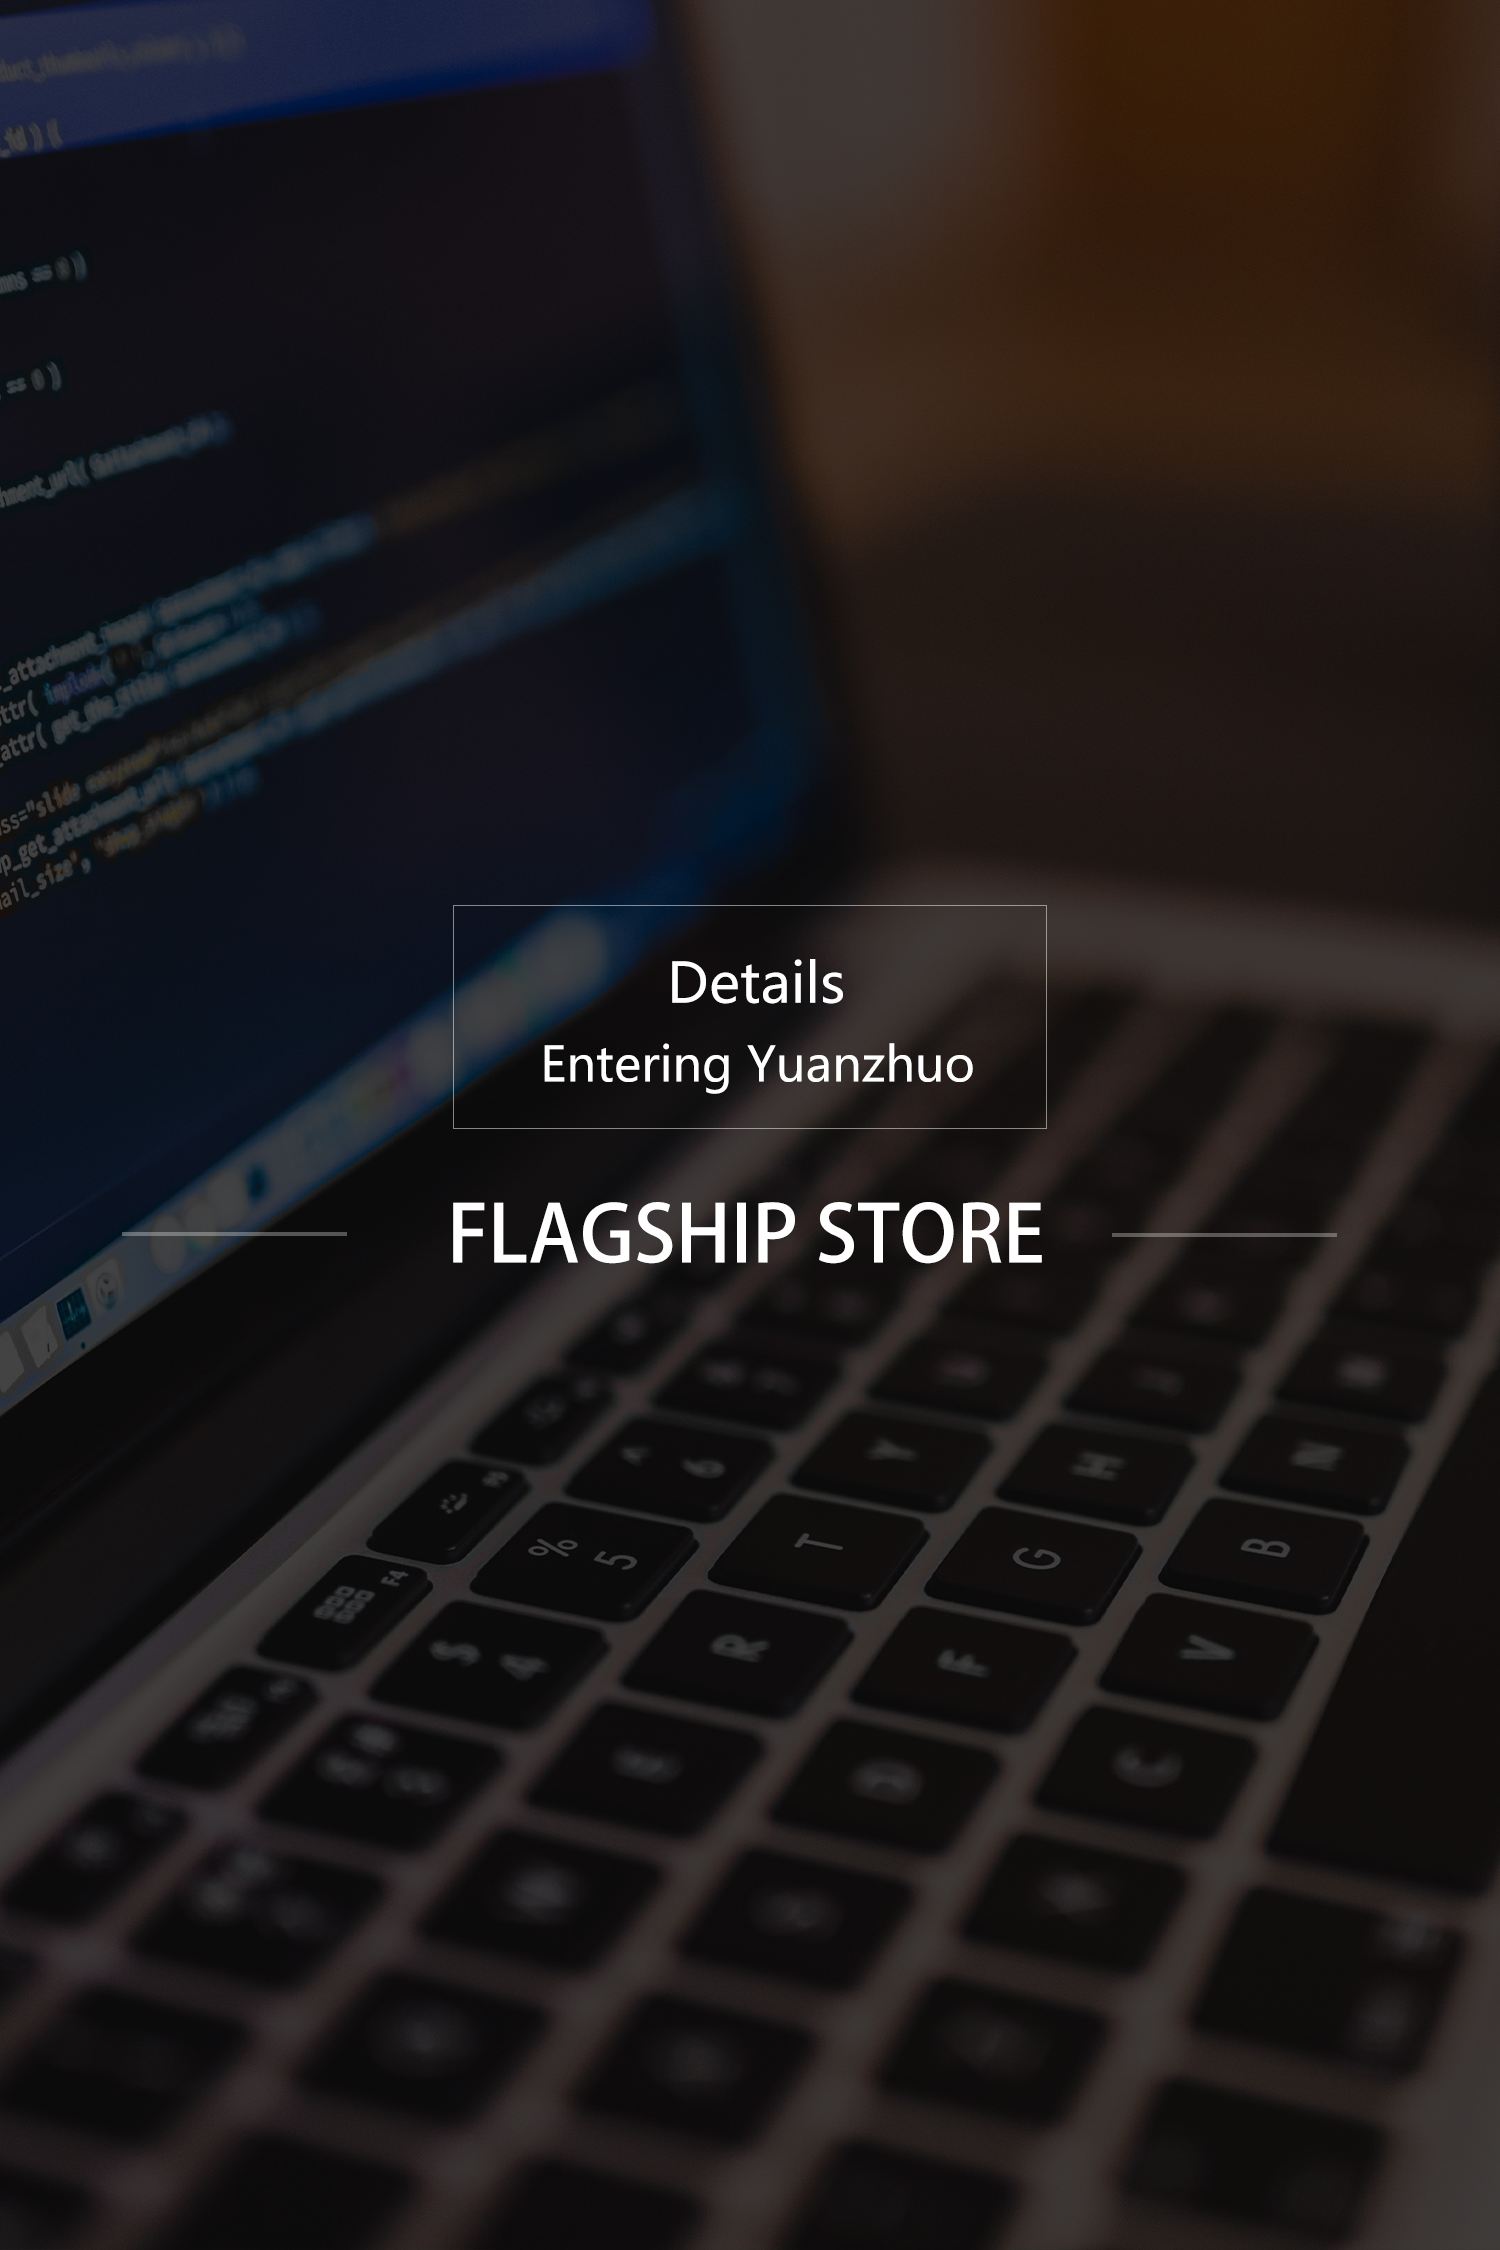 Flagship store